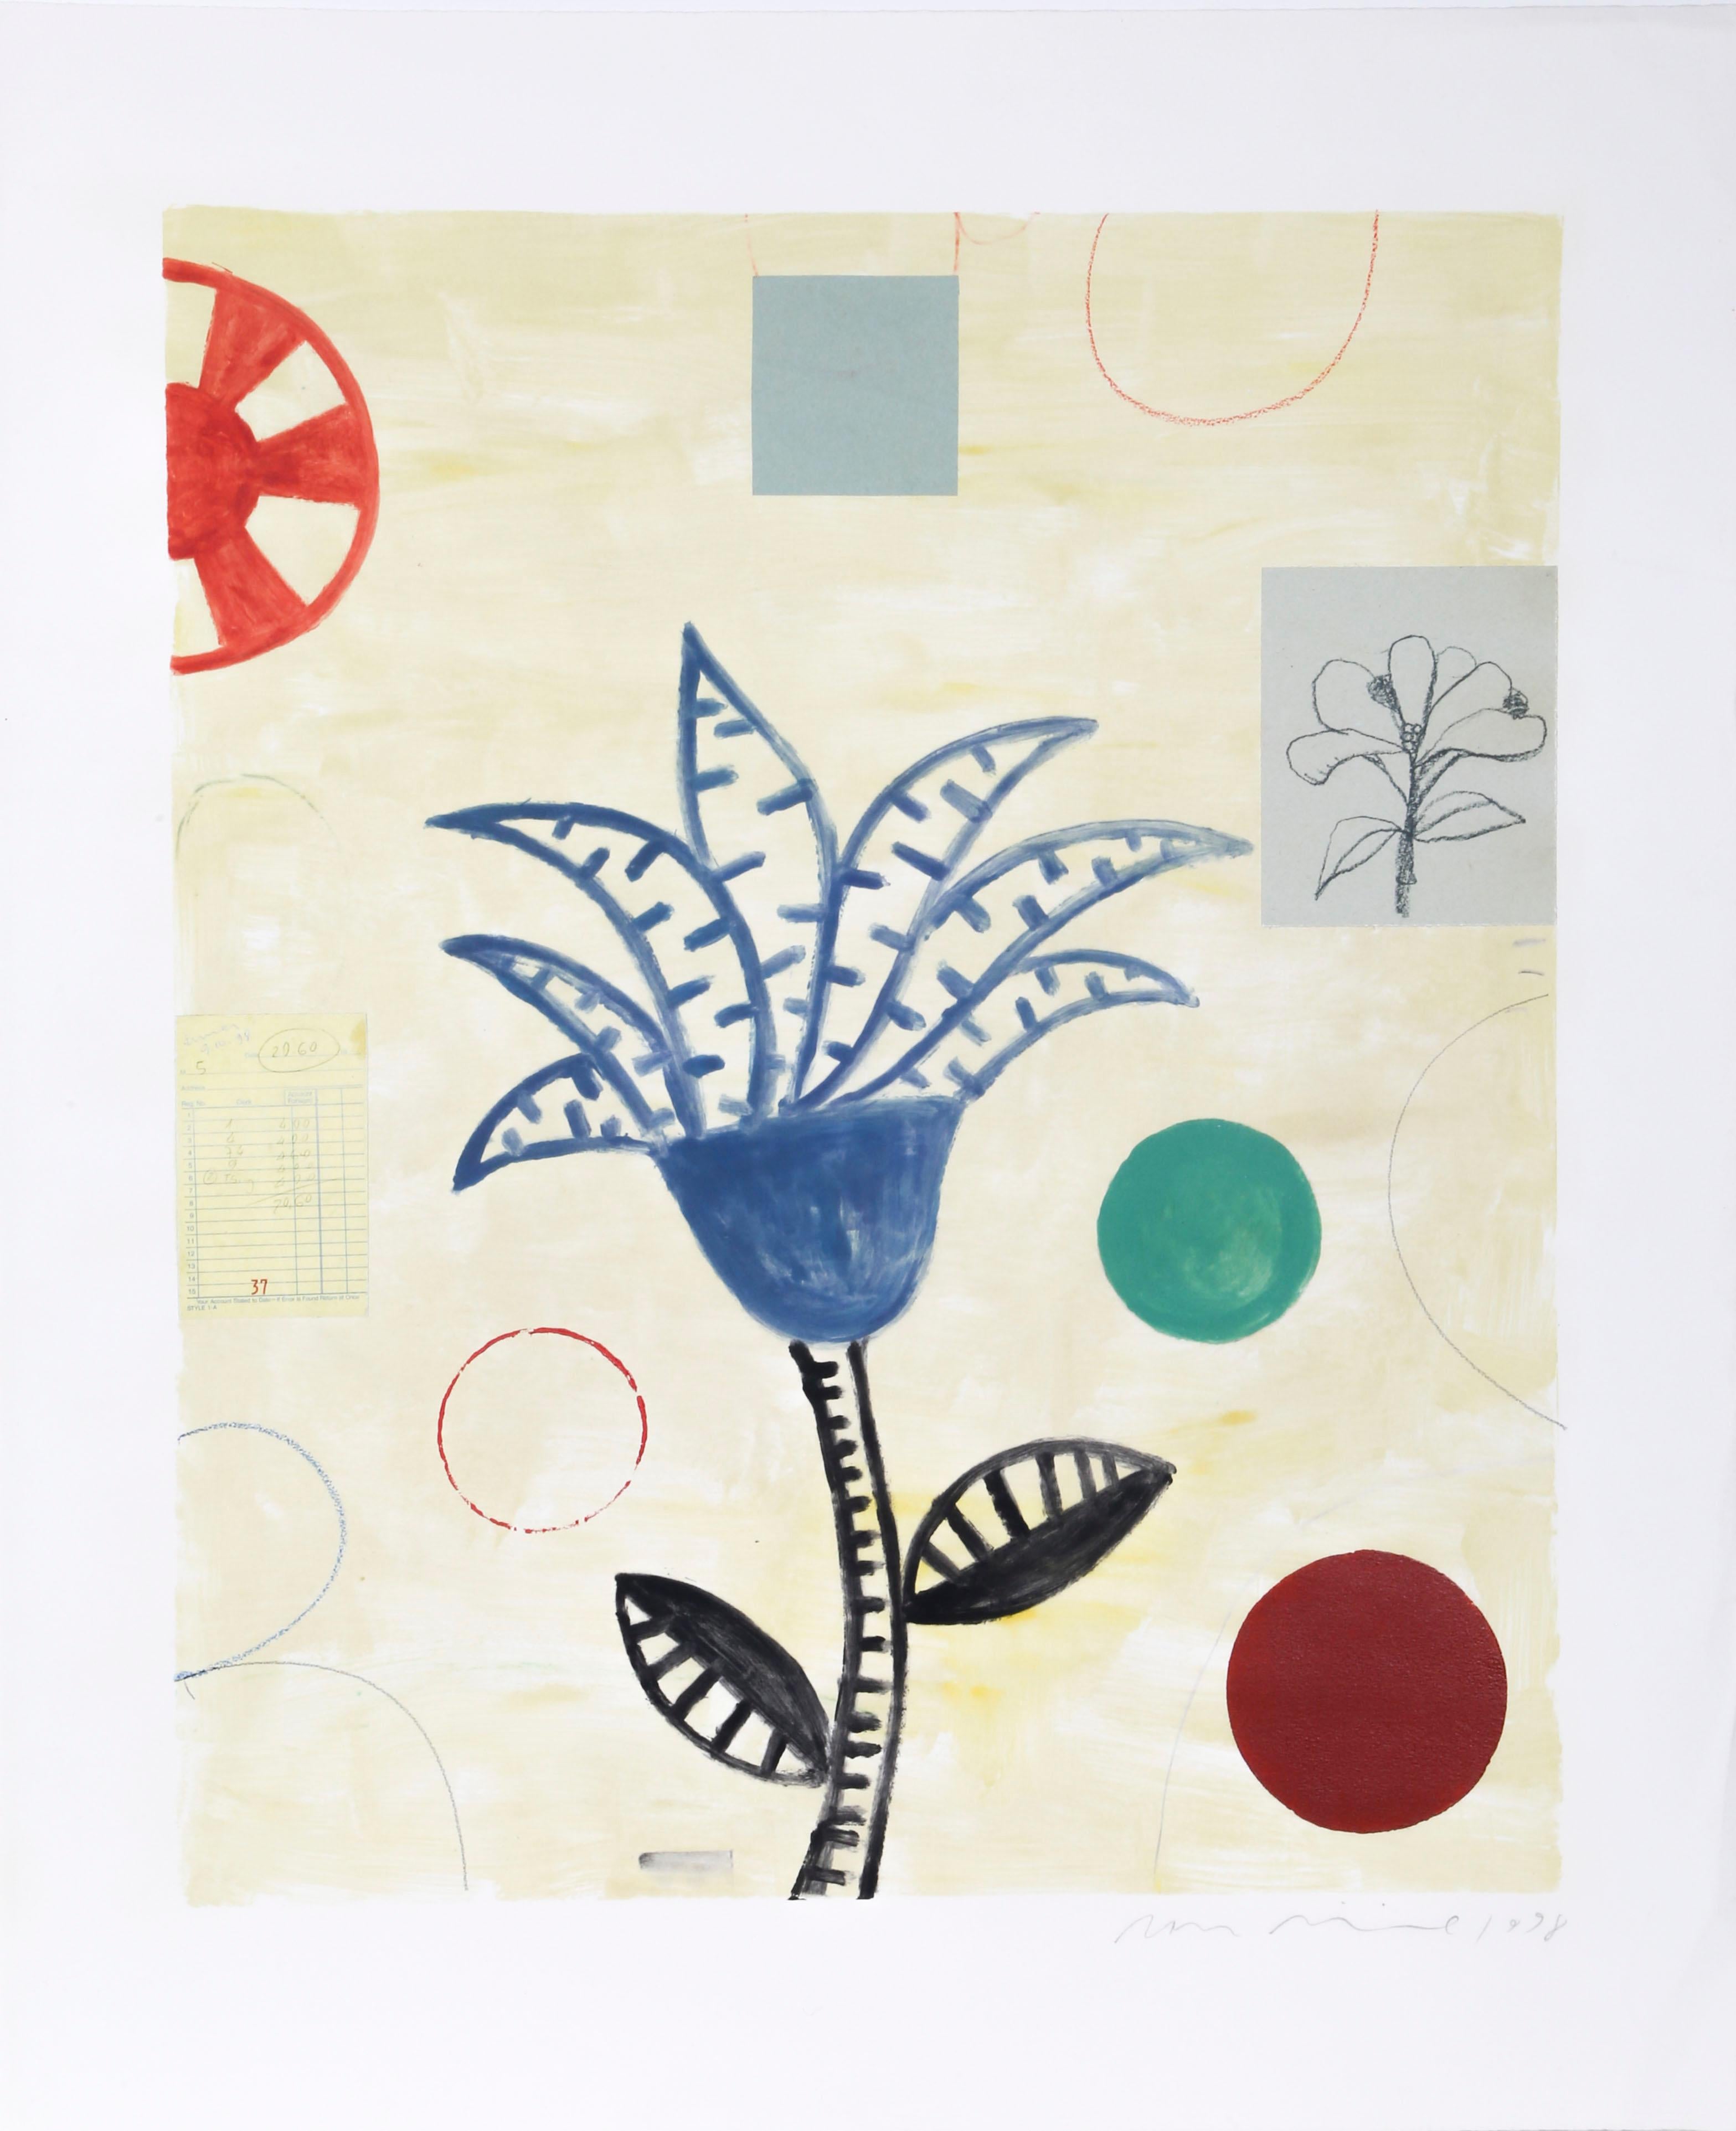 Flower
Dan Rizzie, American (1951)
Date: 1998
Oil and Collage Monotype, signed and dated
Size: 28 x 23 in. (71.12 x 58.42 cm)